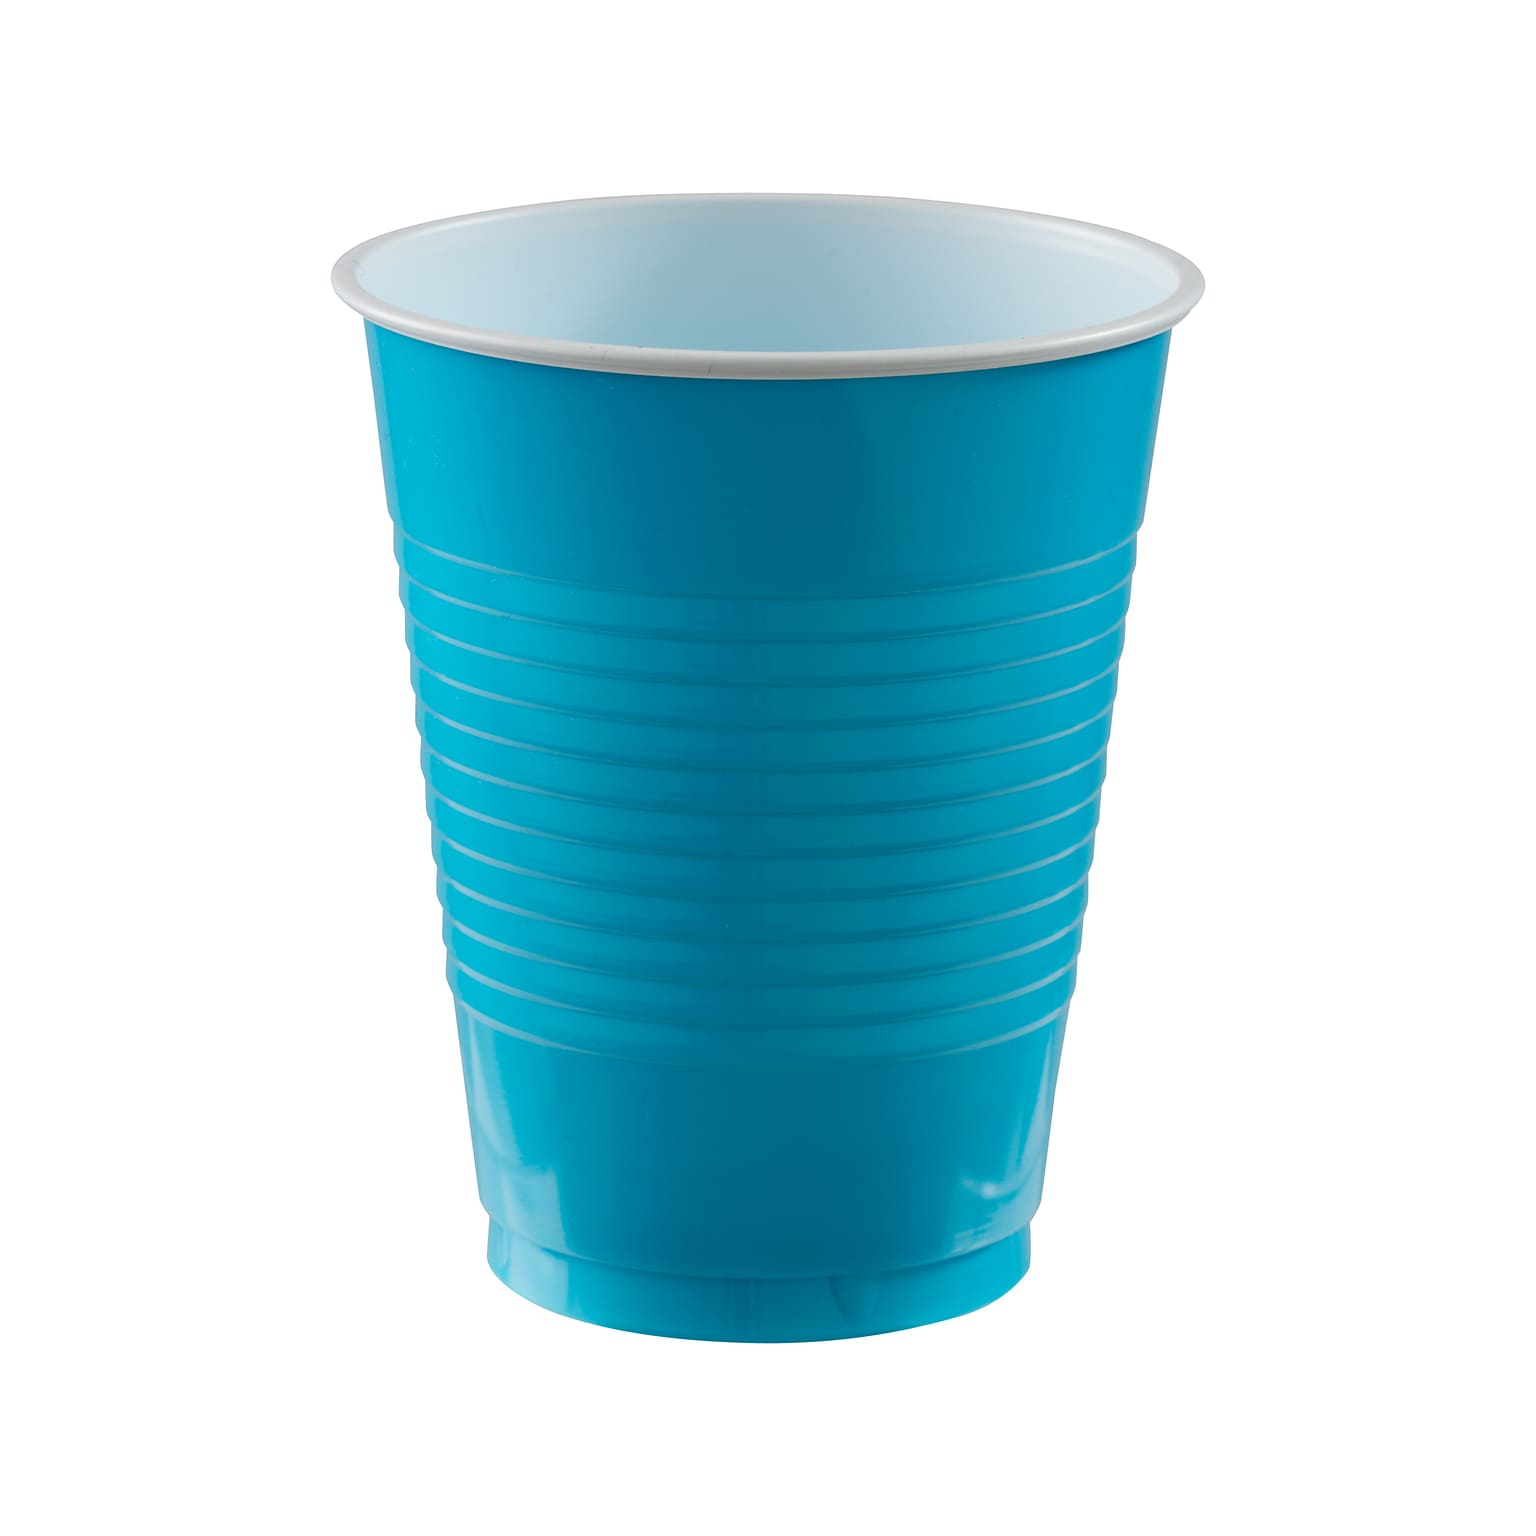 Amscan Party Plastic Cup, Caribbean Blue, 50/Sleeve, 3 Sleeves/Pack (436810.54)